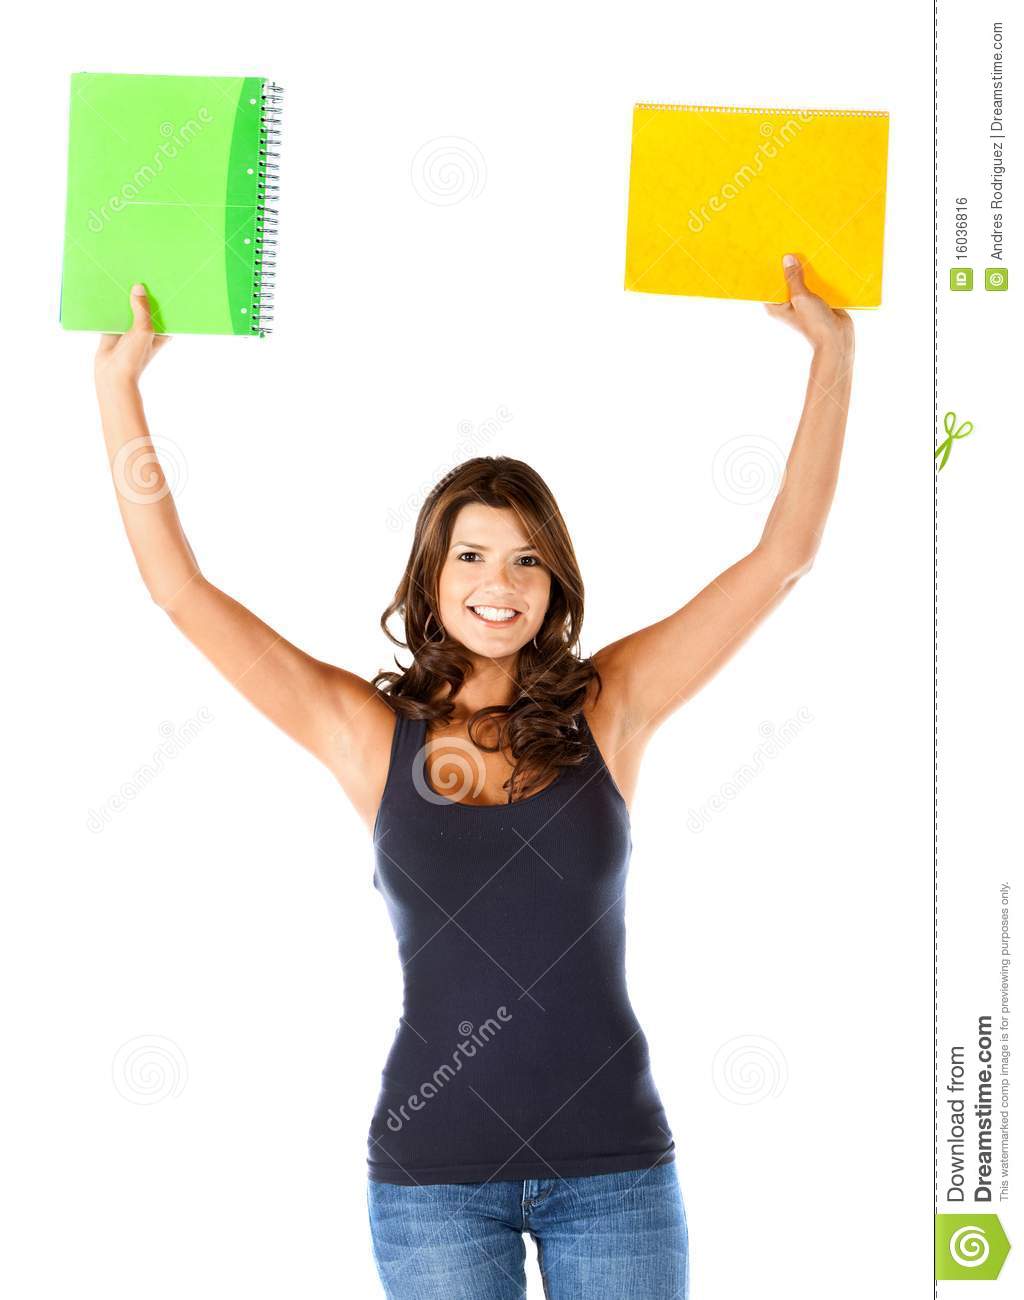 Excited Female Student Royalty Free Stock Image   Image  16036816